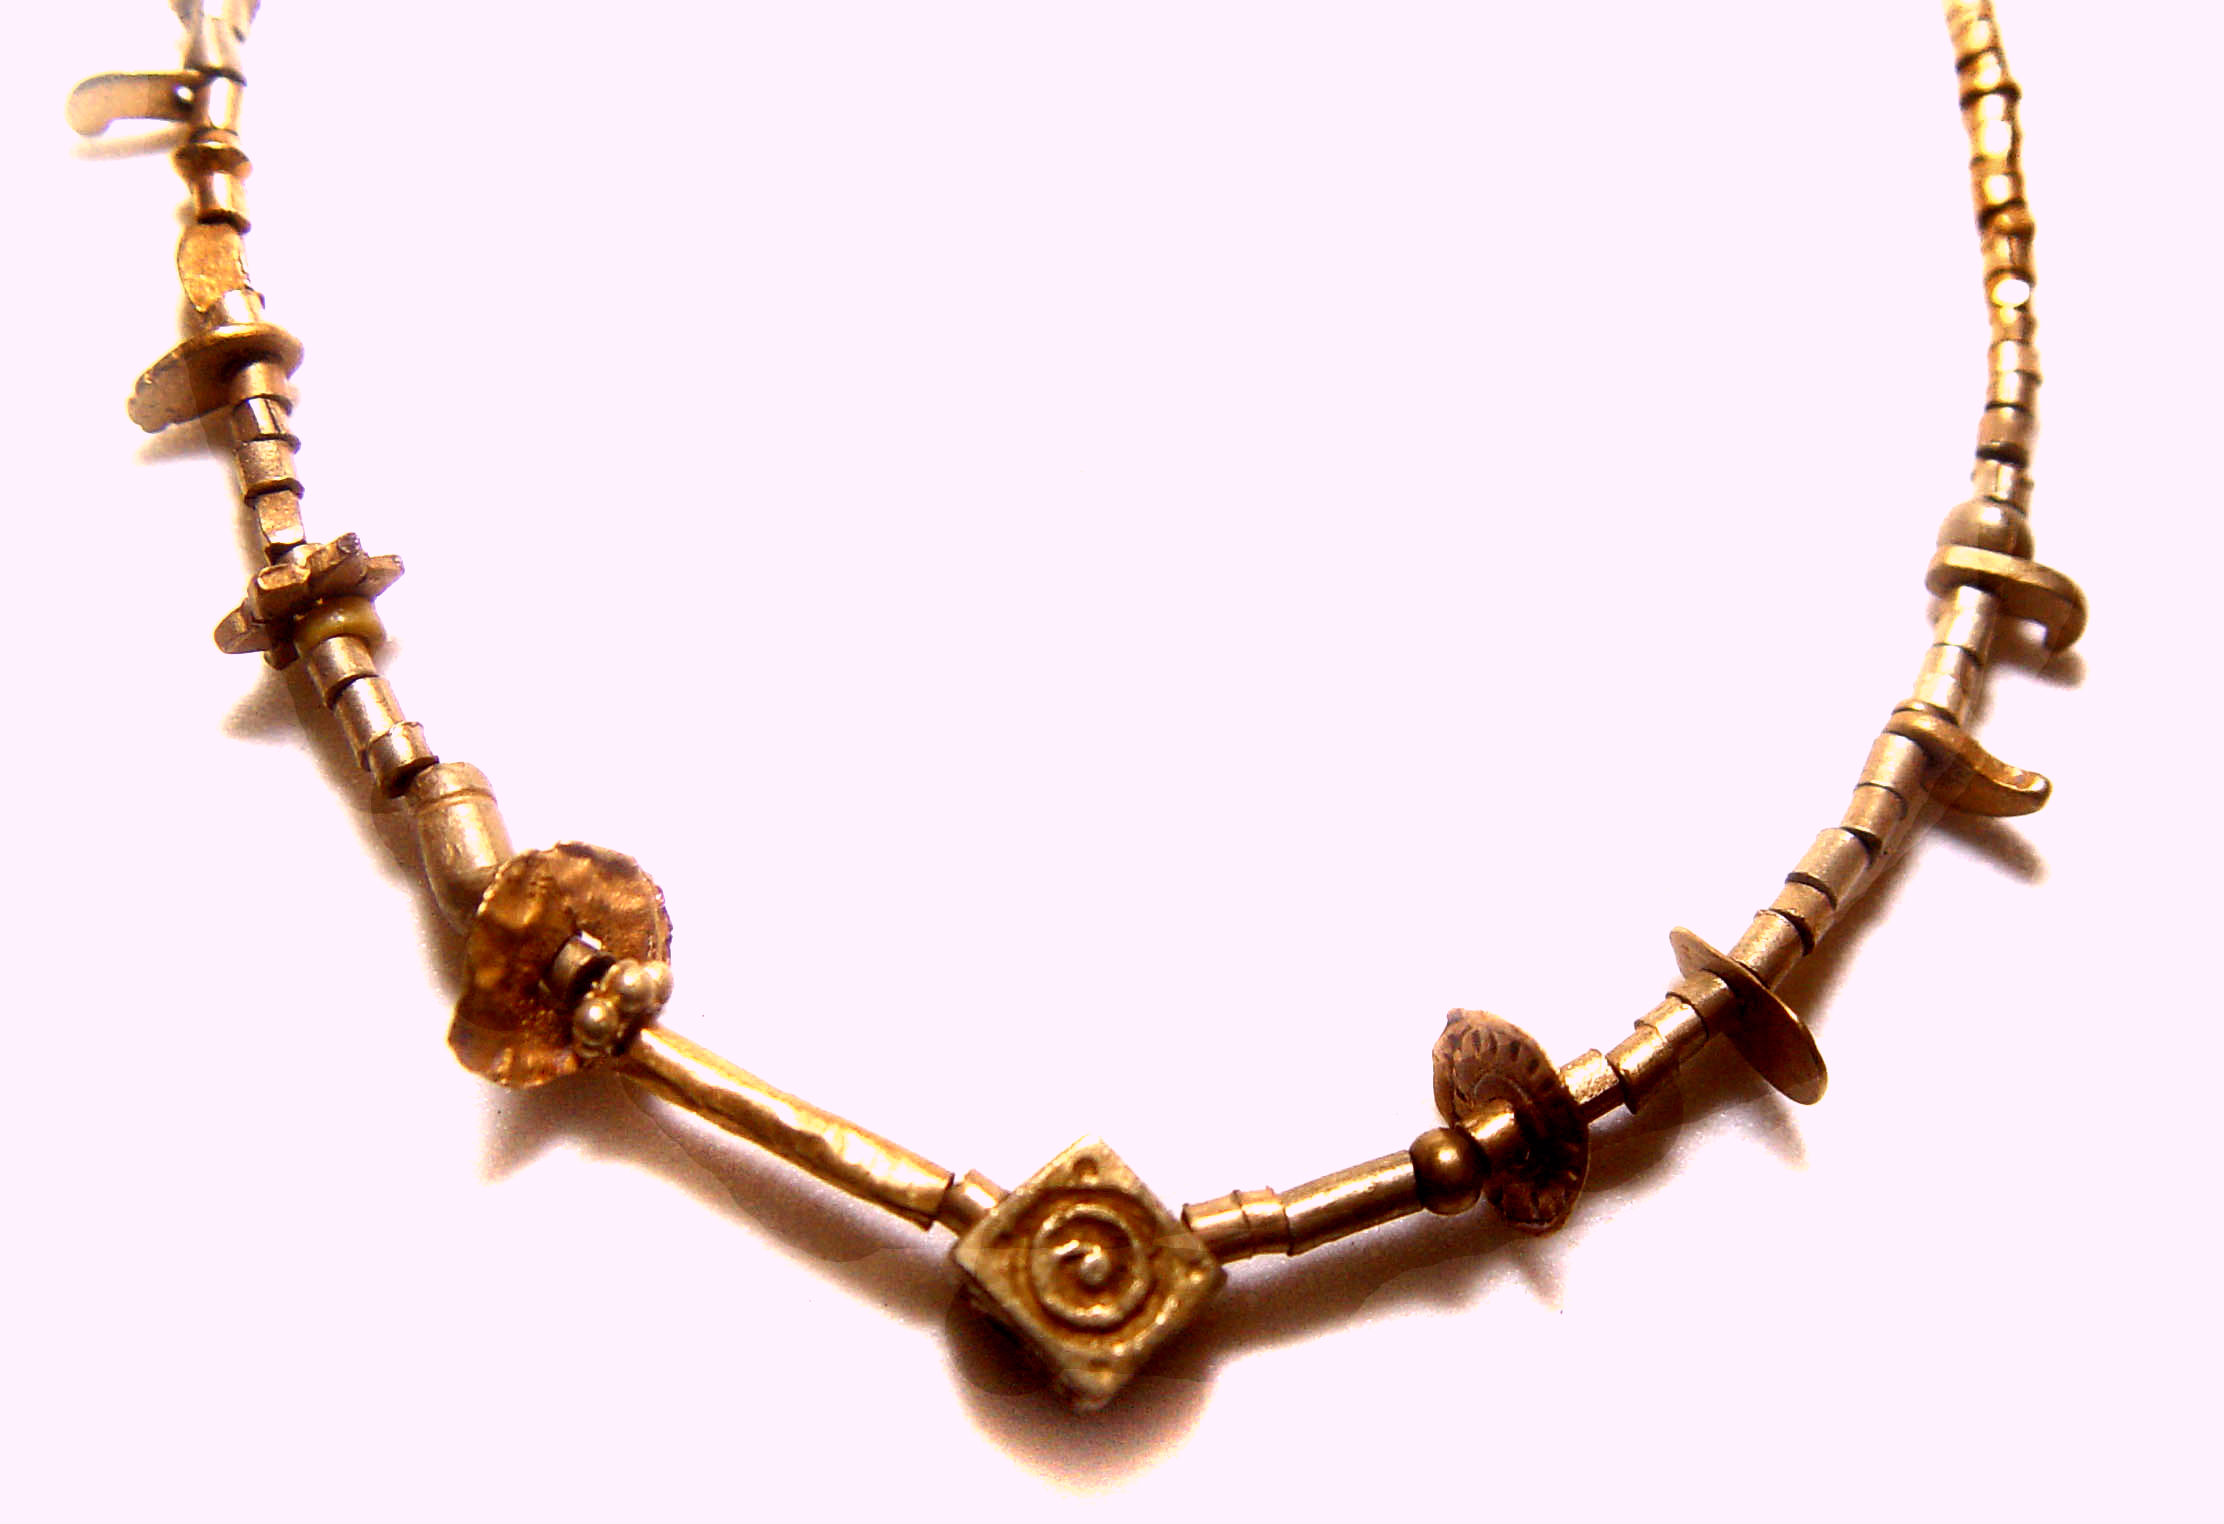 Rare Pyu Micro Solid Gold Necklace 100 -500 AD For Sale | www.ermes-unice.fr | Classifieds